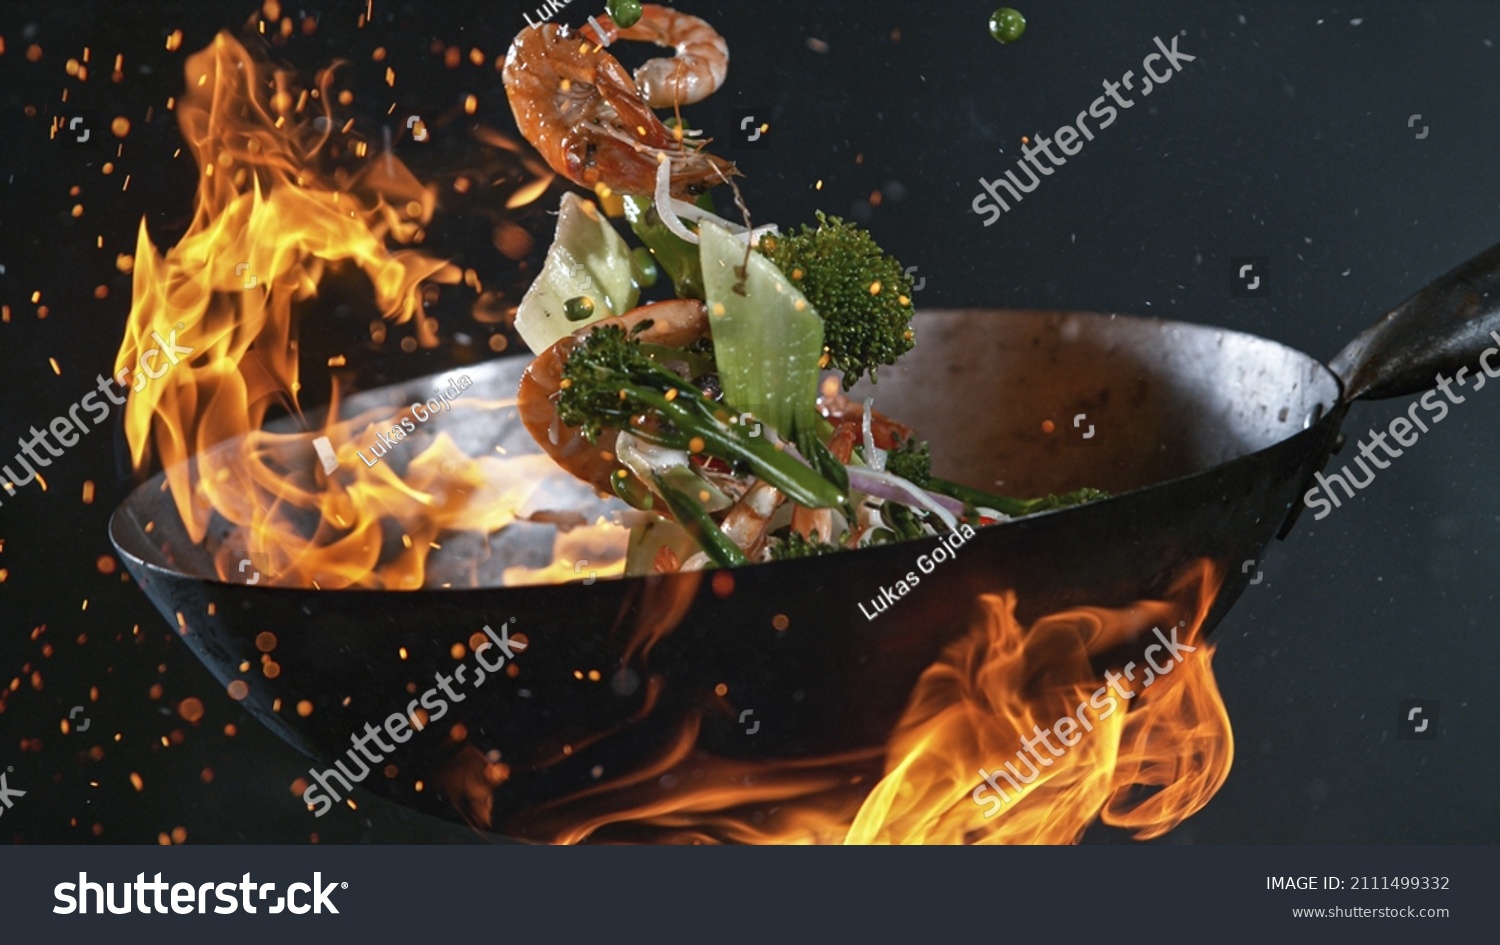 Freeze Motion of Wok Pan with Flying Ingredients in the Air and Fire Flames. #2111499332